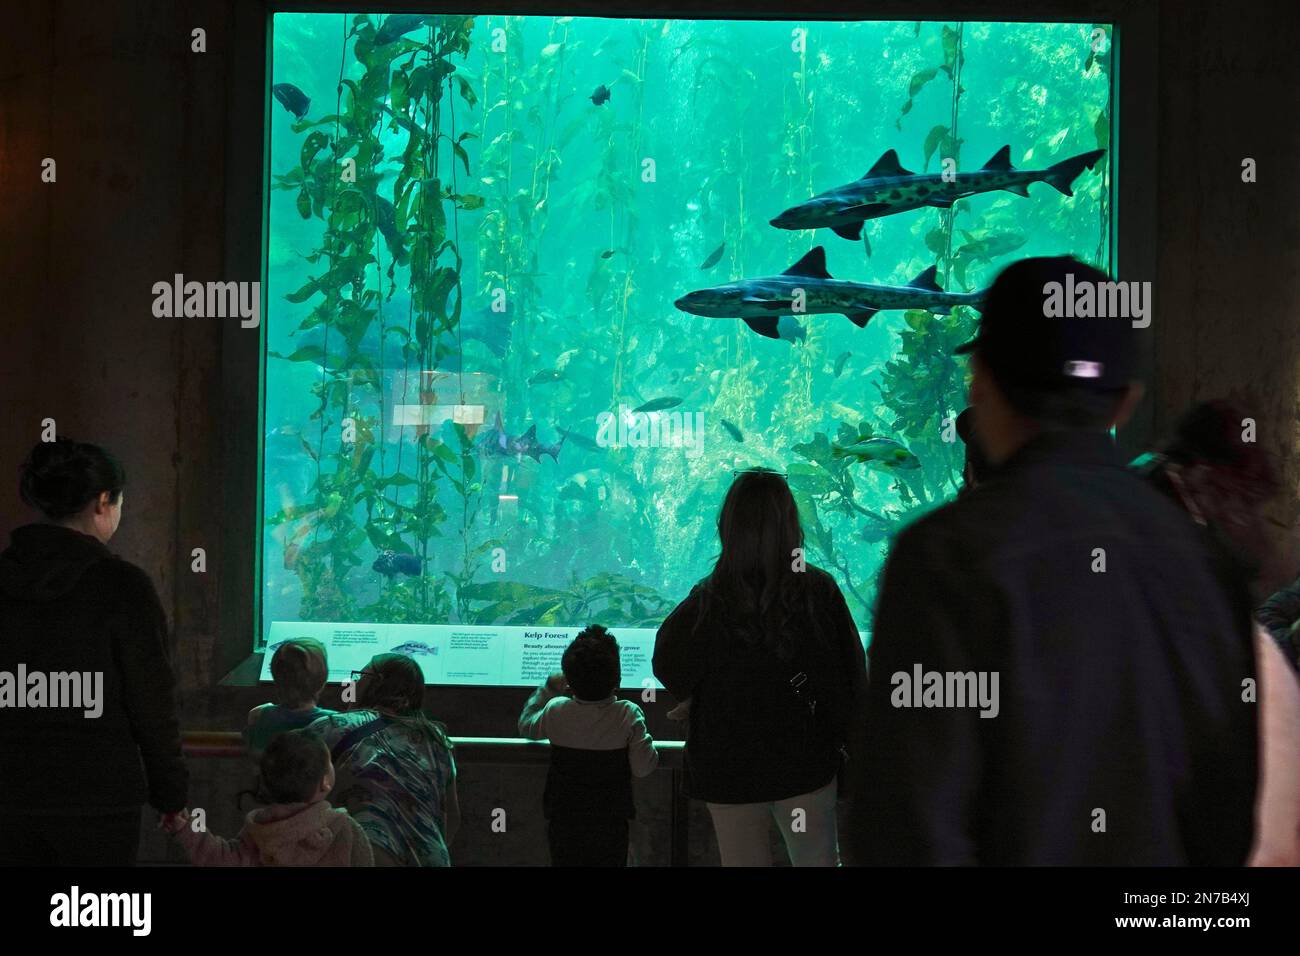 Cannery Row, Monterey, CA, USA. 23rd January, 2023  Sea life at the Monterey Bay Aquarium - here two leopard sharks swim in the big tank as hundreds of tourists watch on Stock Photo